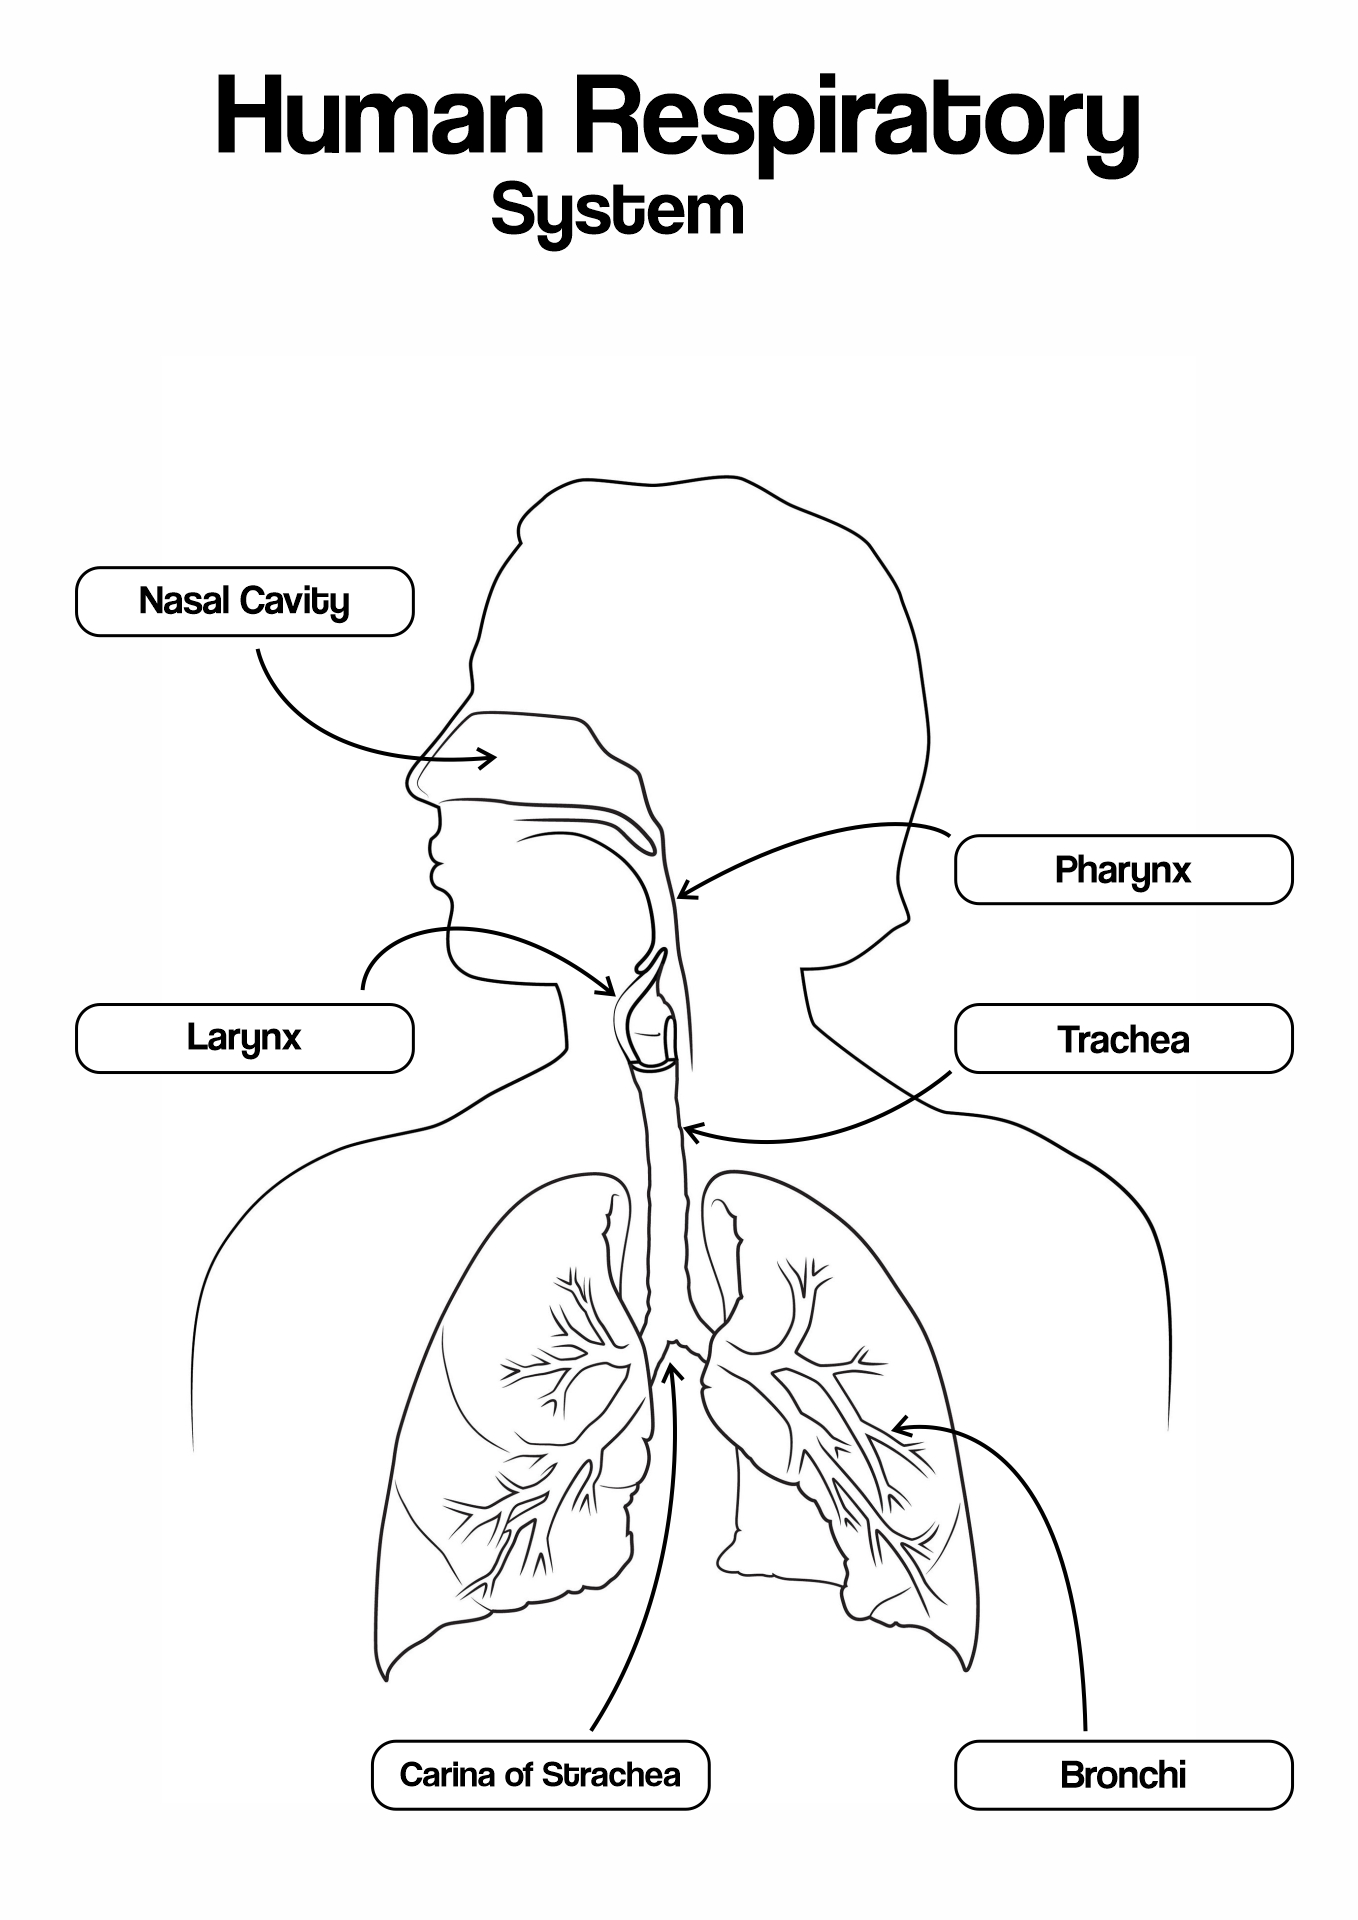 Parts of the Human Respiratory System Image